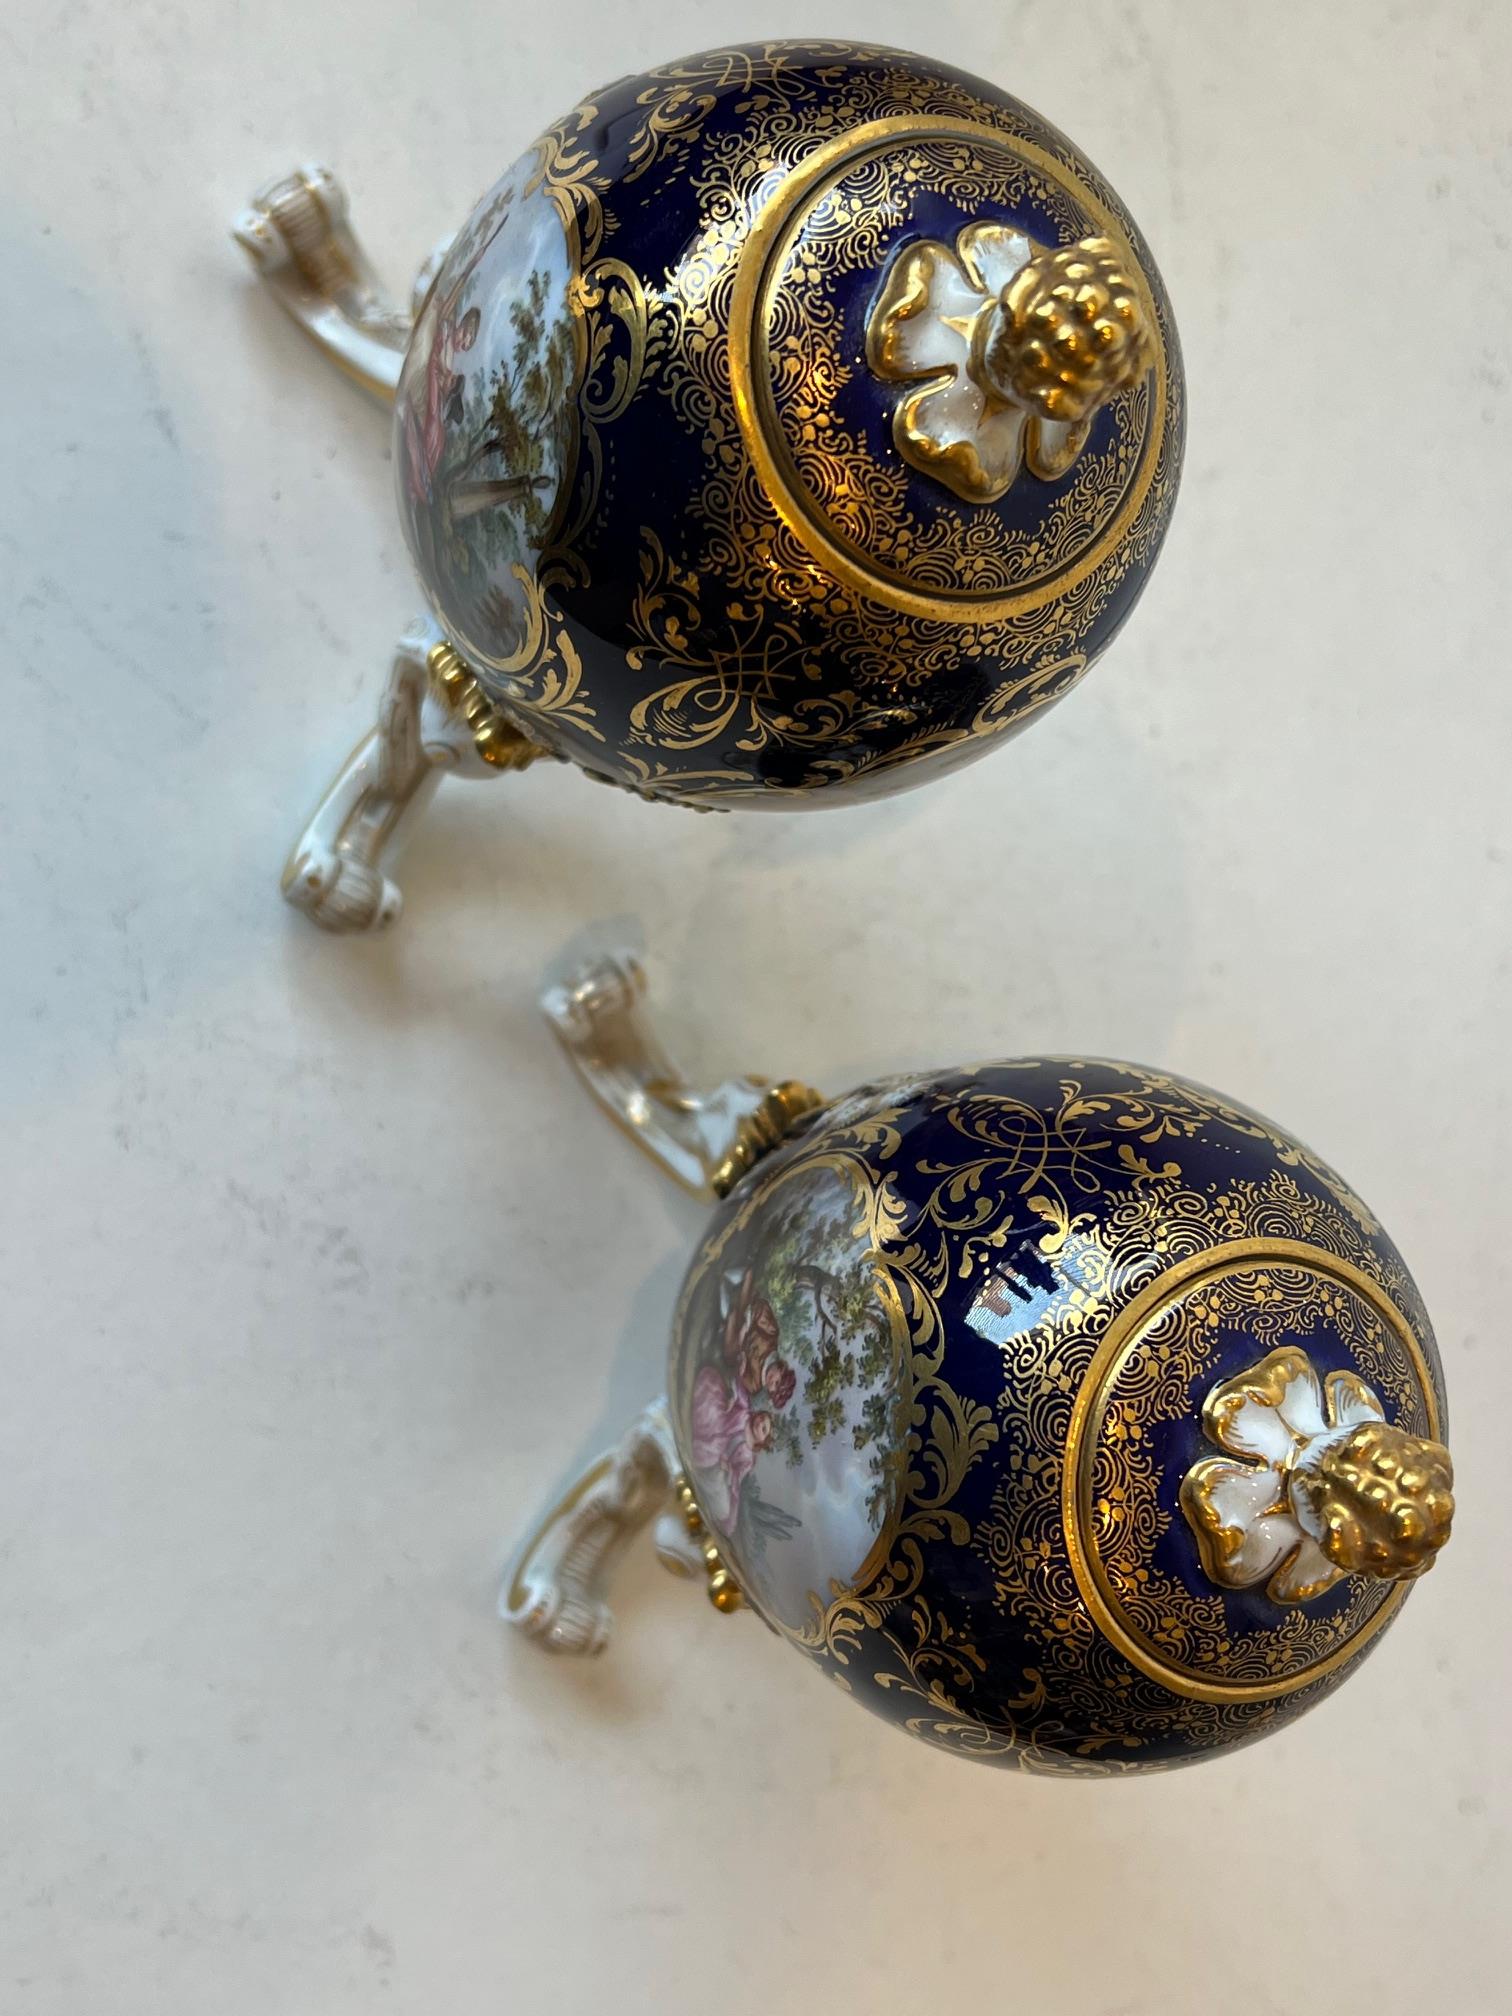 MEISSEN: A PAIR OF LATE 19TH / EARLY 20TH CENTURY PORCELAIN EGG SHAPED TEA CADDIES - Image 7 of 16